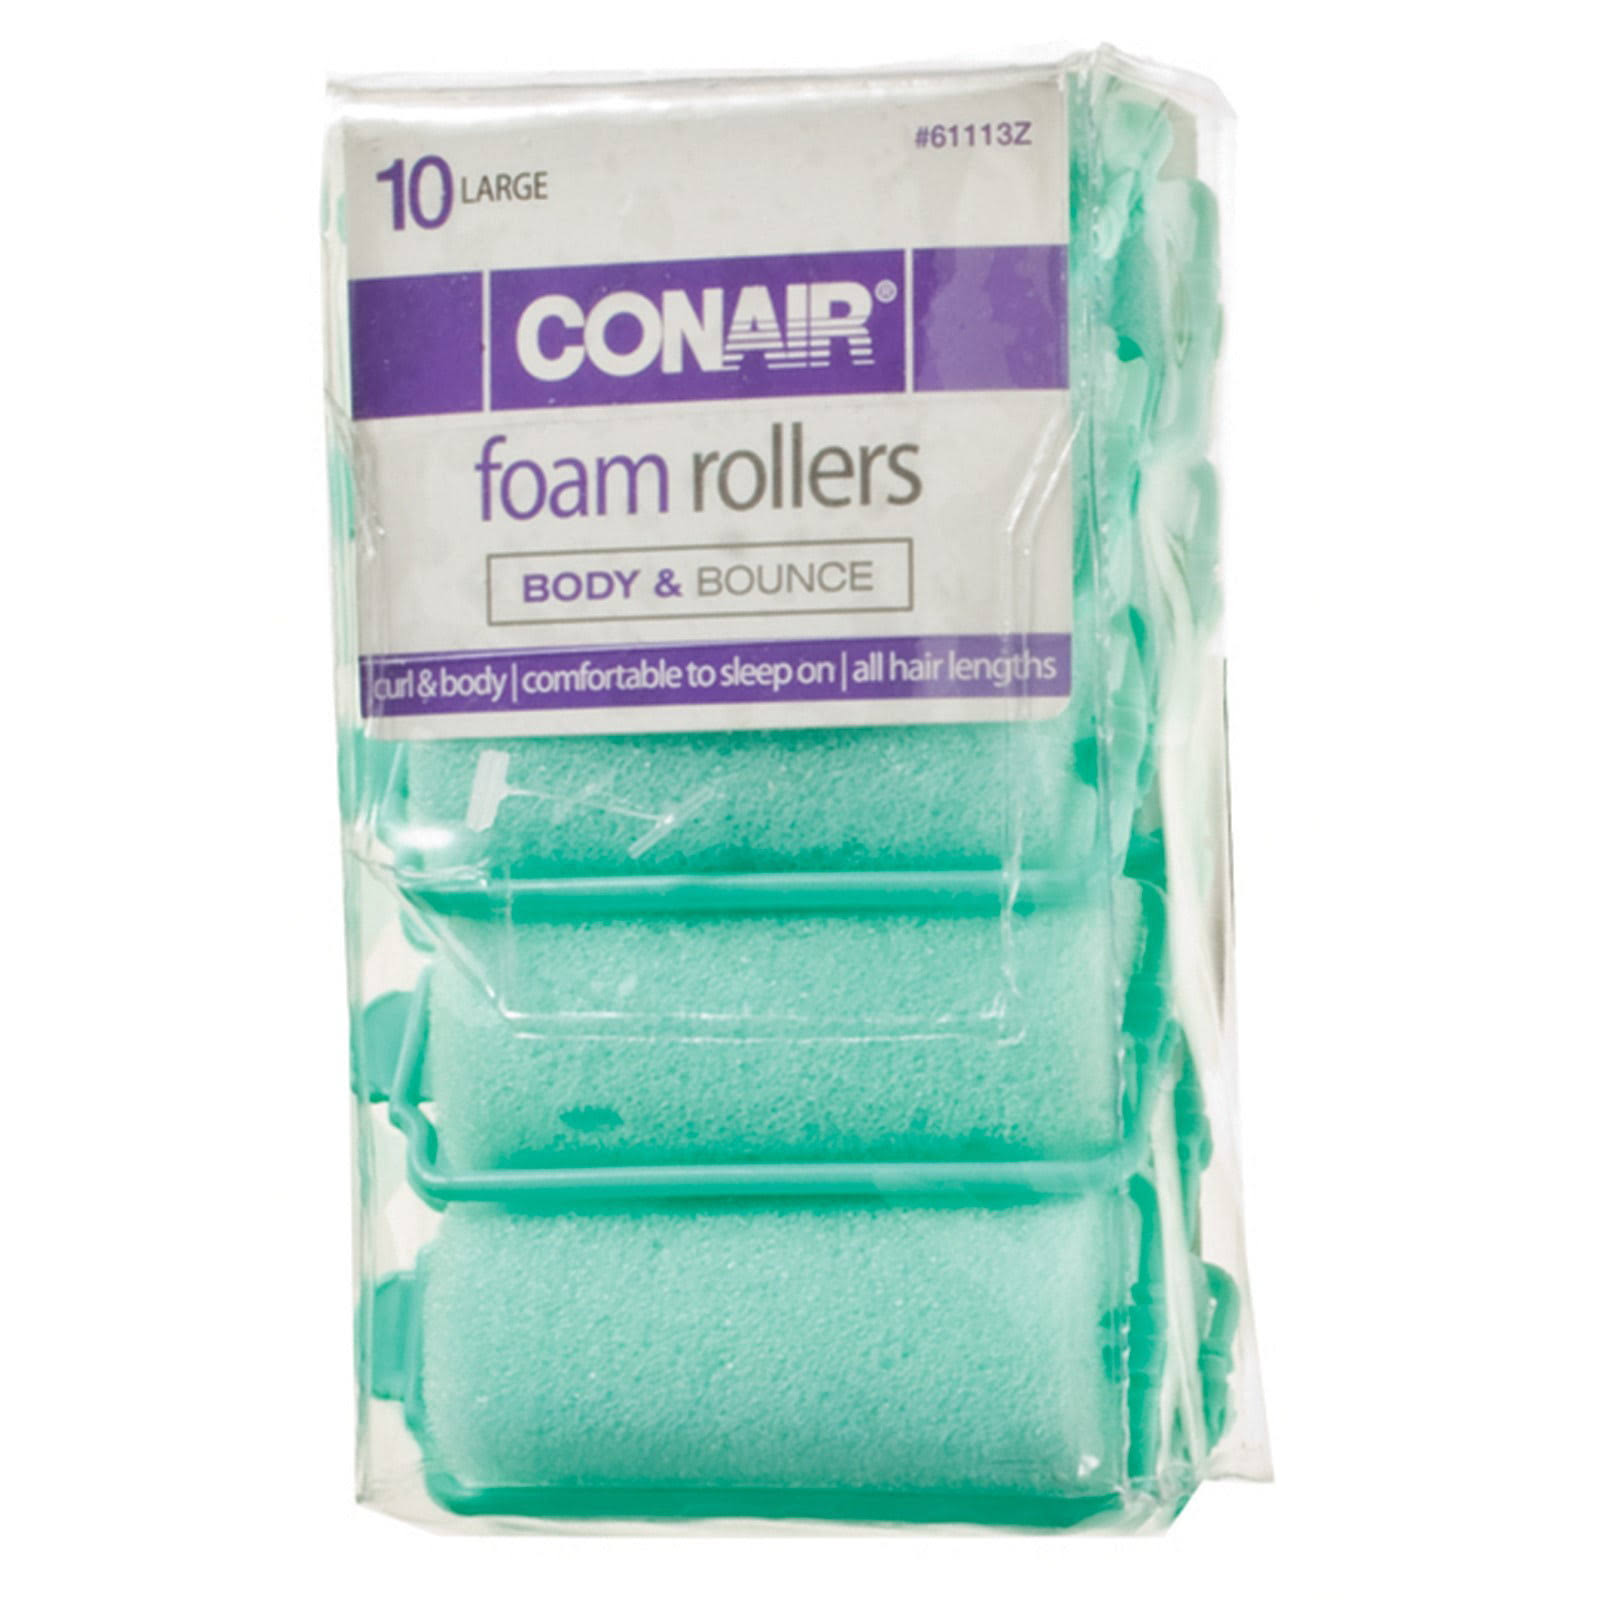 Conair Styling Essentials Foam Rollers - Large, 10ct